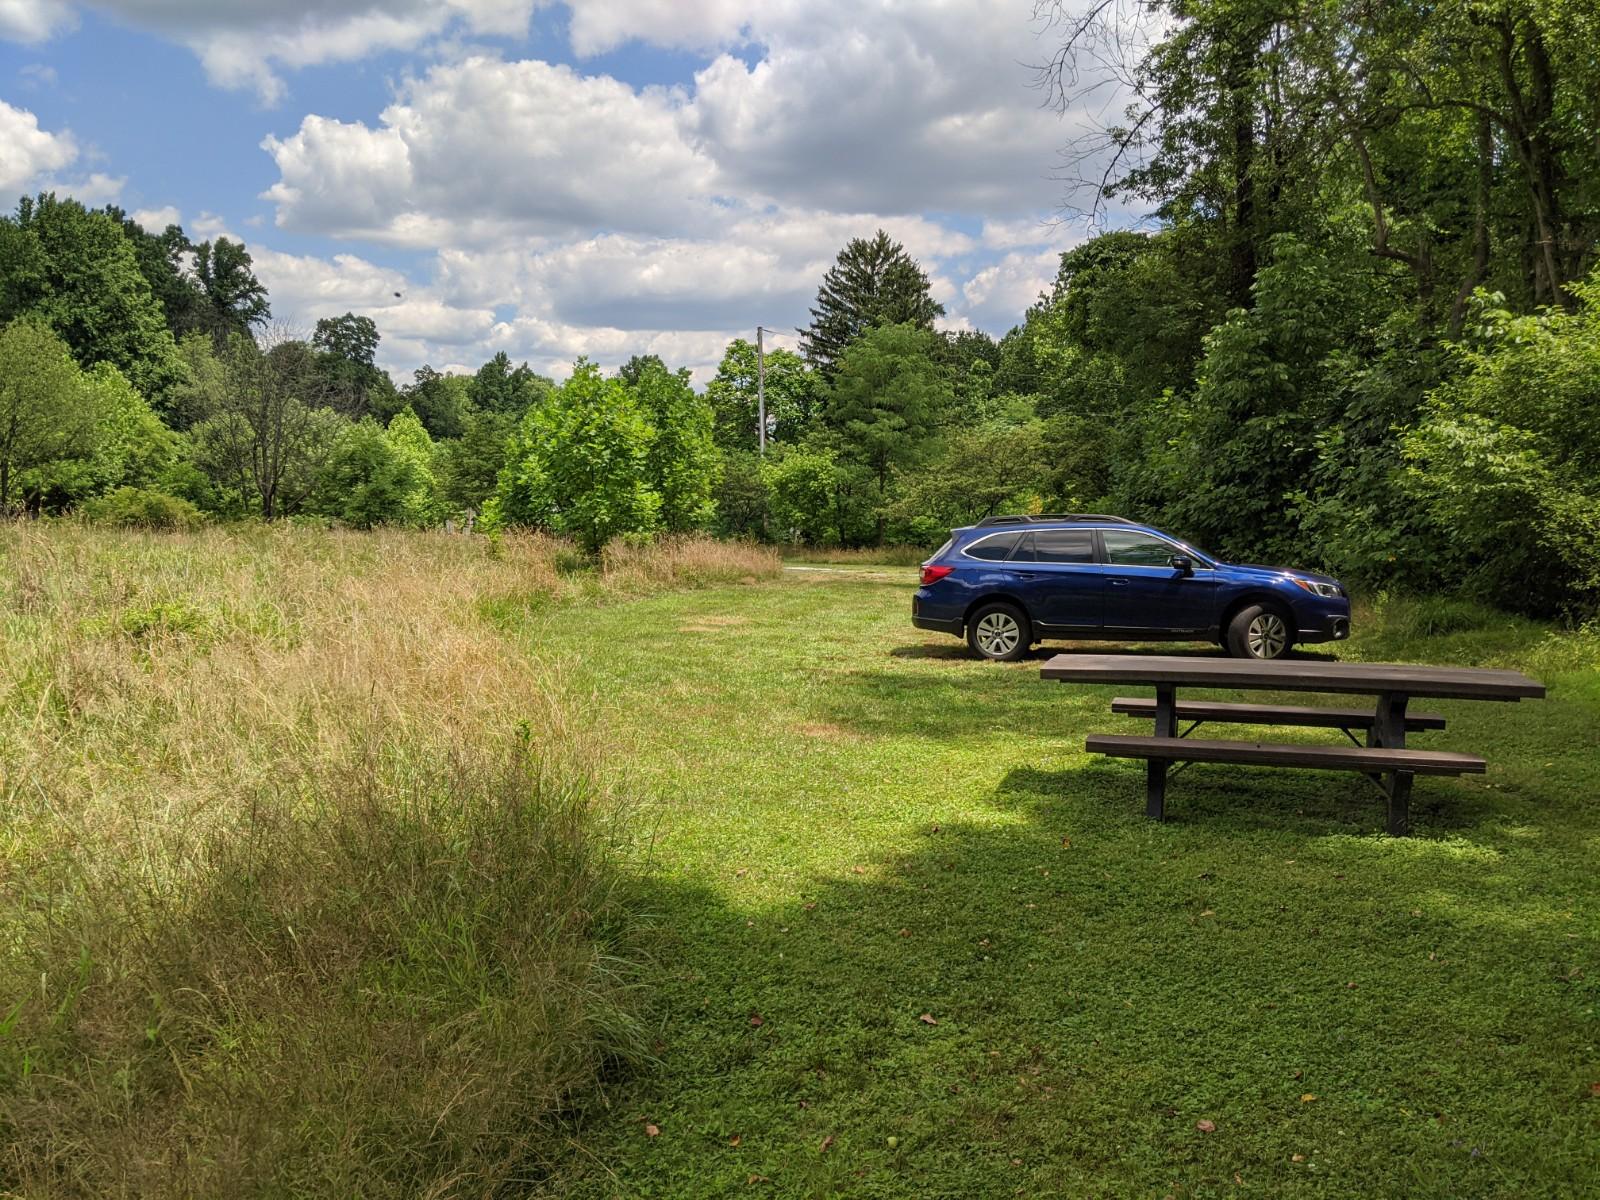 Blue car in grassy and gravel parking area. A picnic bench is on the foreground